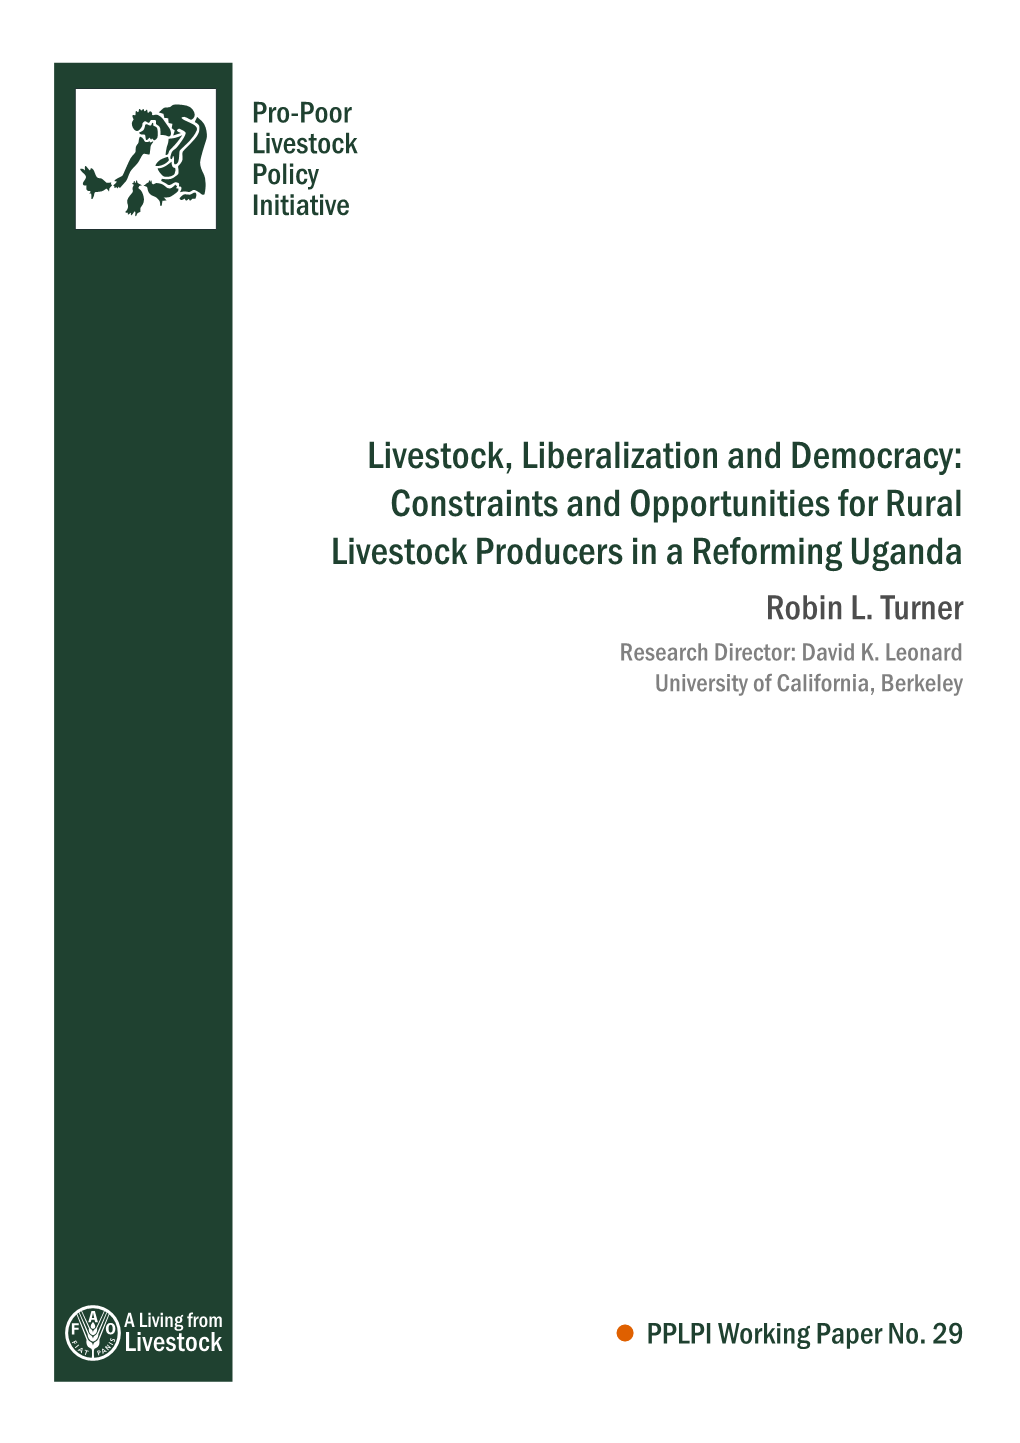 Livestock, Liberalization and Democracy: Constraints and Opportunities for Rural Livestock Producers in a Reforming Uganda Robin L